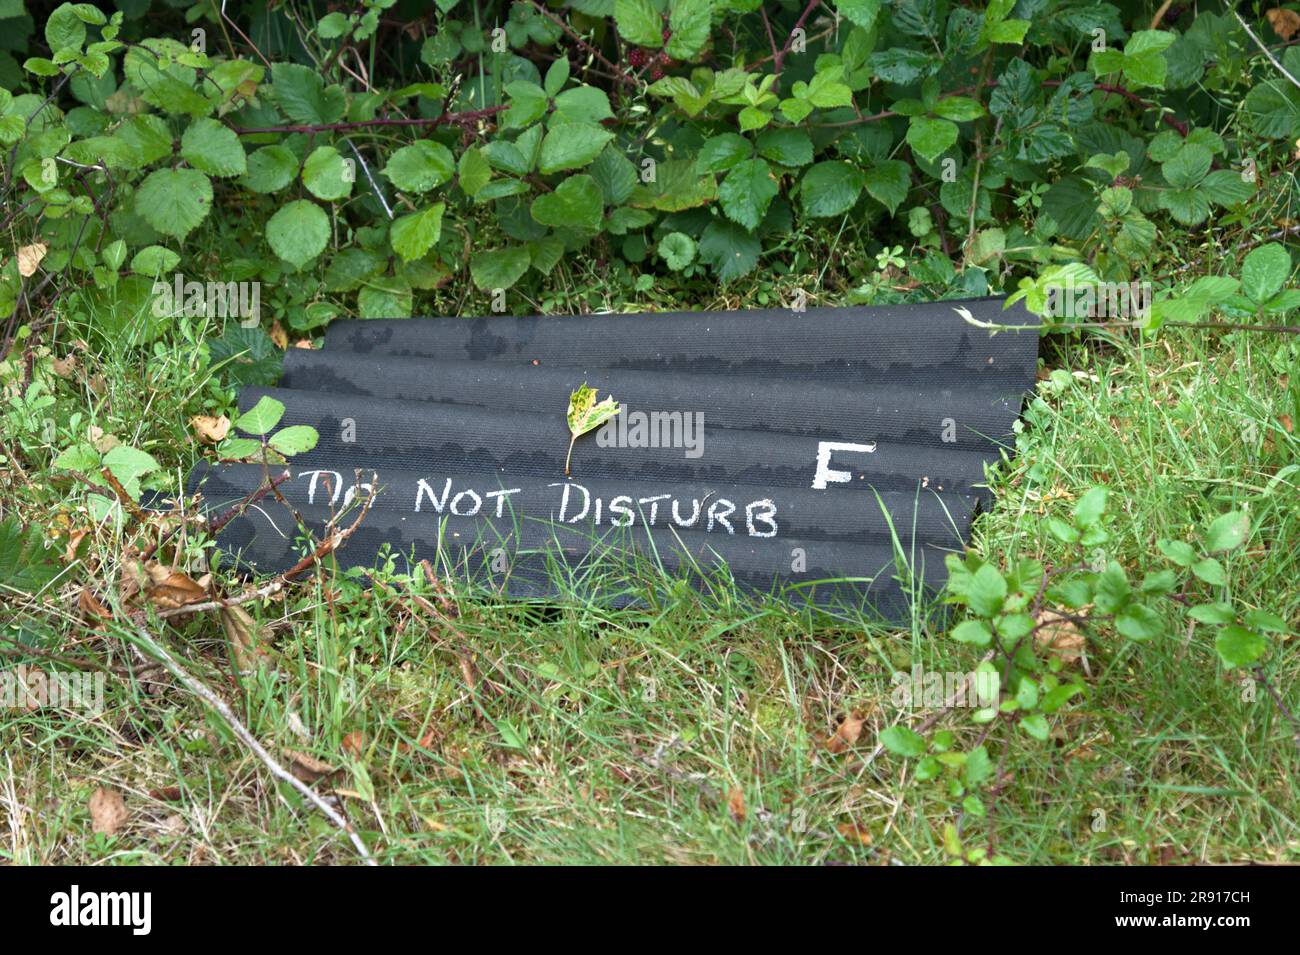 Bitumen, Tar, Corrugated Sheet With Do Not Disturb Painted On It Used To Attract Snakes, Reptiles For Surveying. England UK Stock Photo